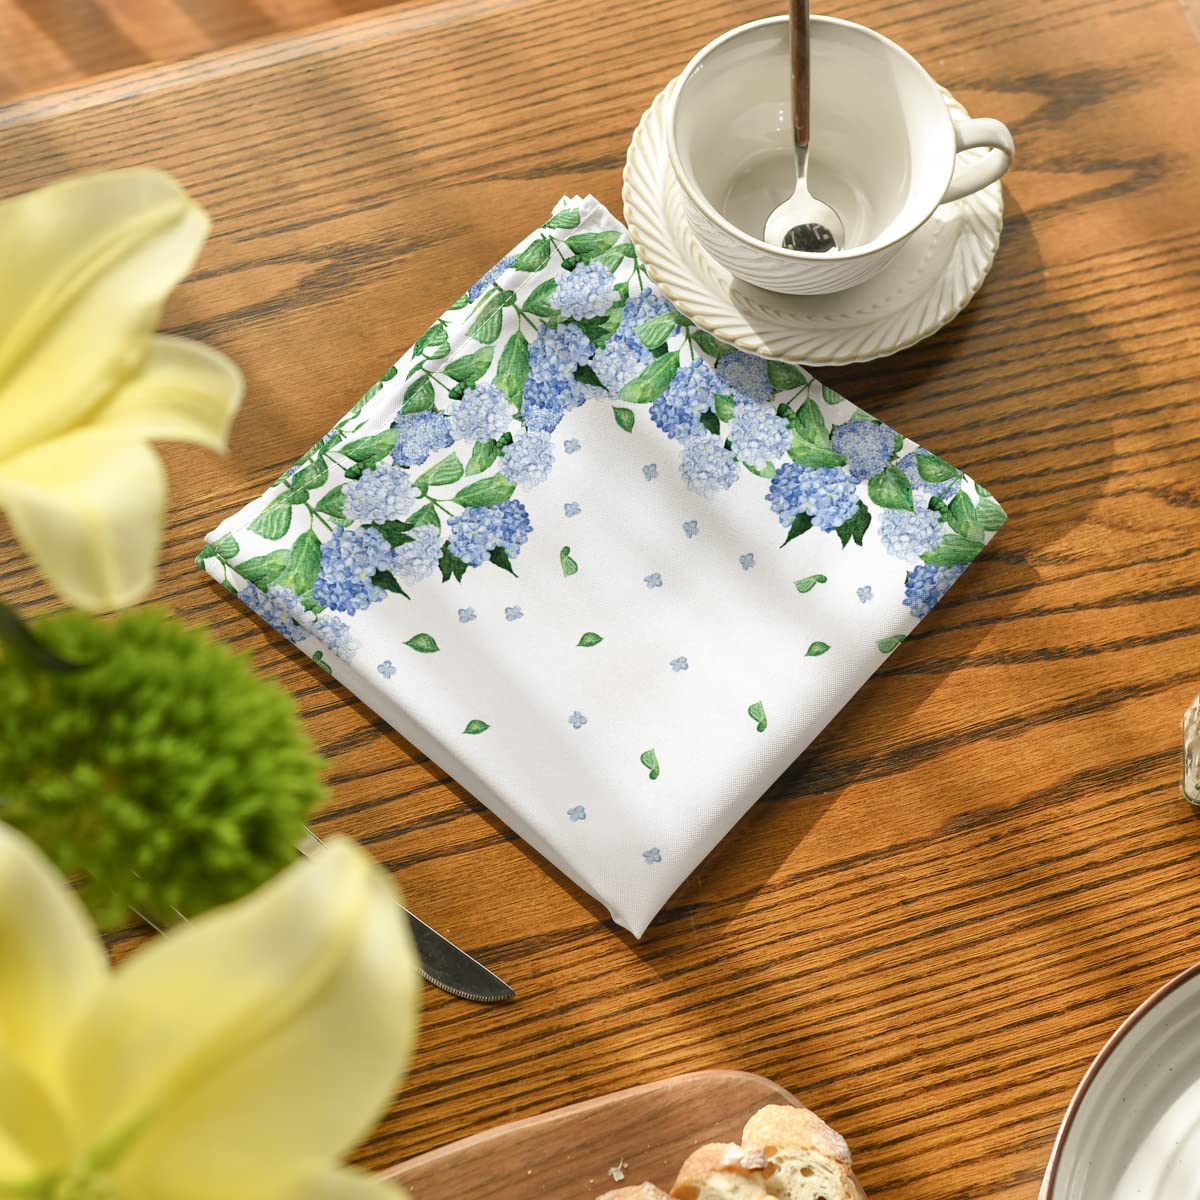 Spring Watercolor Hydrangea Floral Tablecloth Summer Rectangular Kitchen Antifouling Table Cover Wedding Party Table Decoration